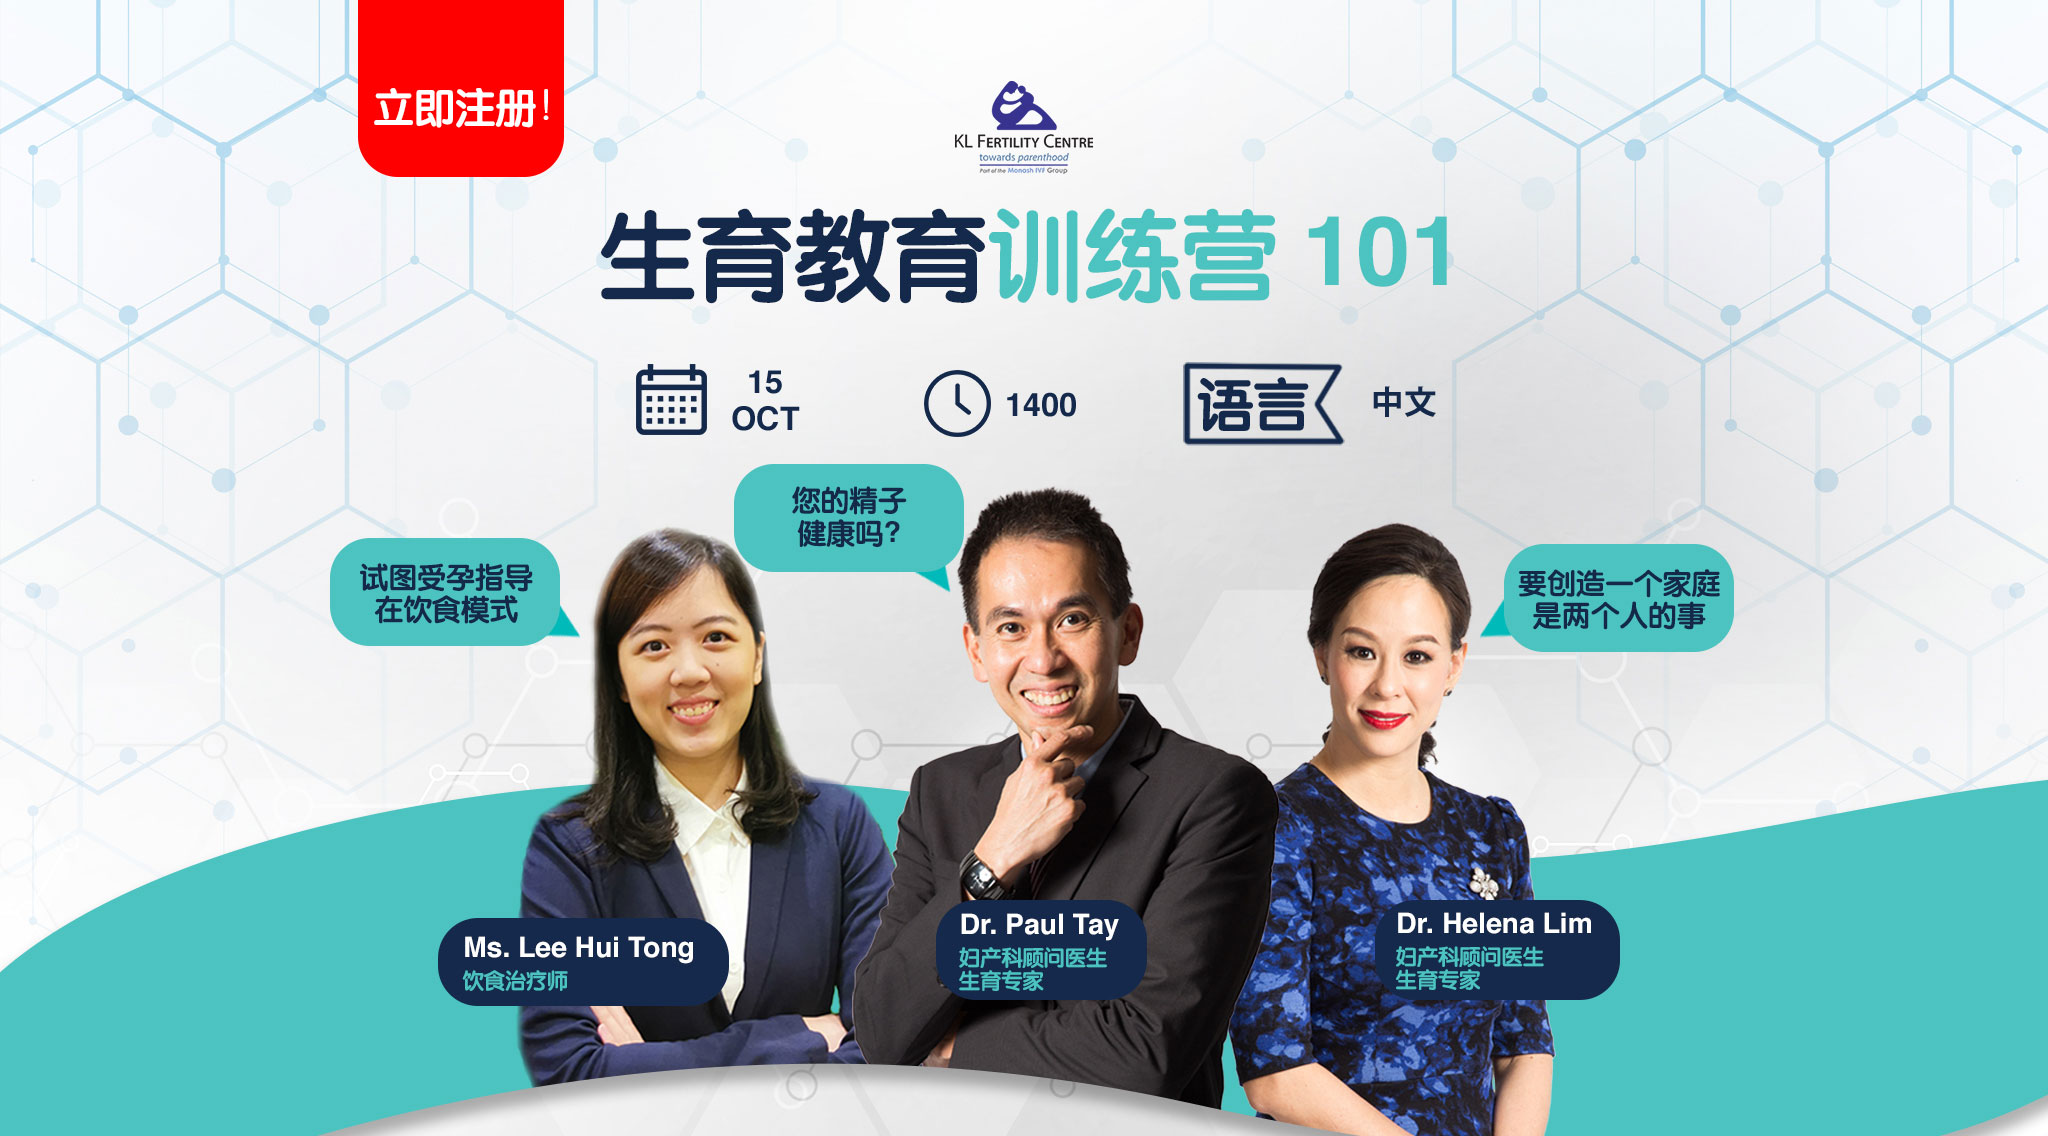 Online Webinar with Ms. Lee Hui Tong, Dr. Paul Tay and Dr. Helena Lim : Fertility Bootcamp 101, 15 October 2022